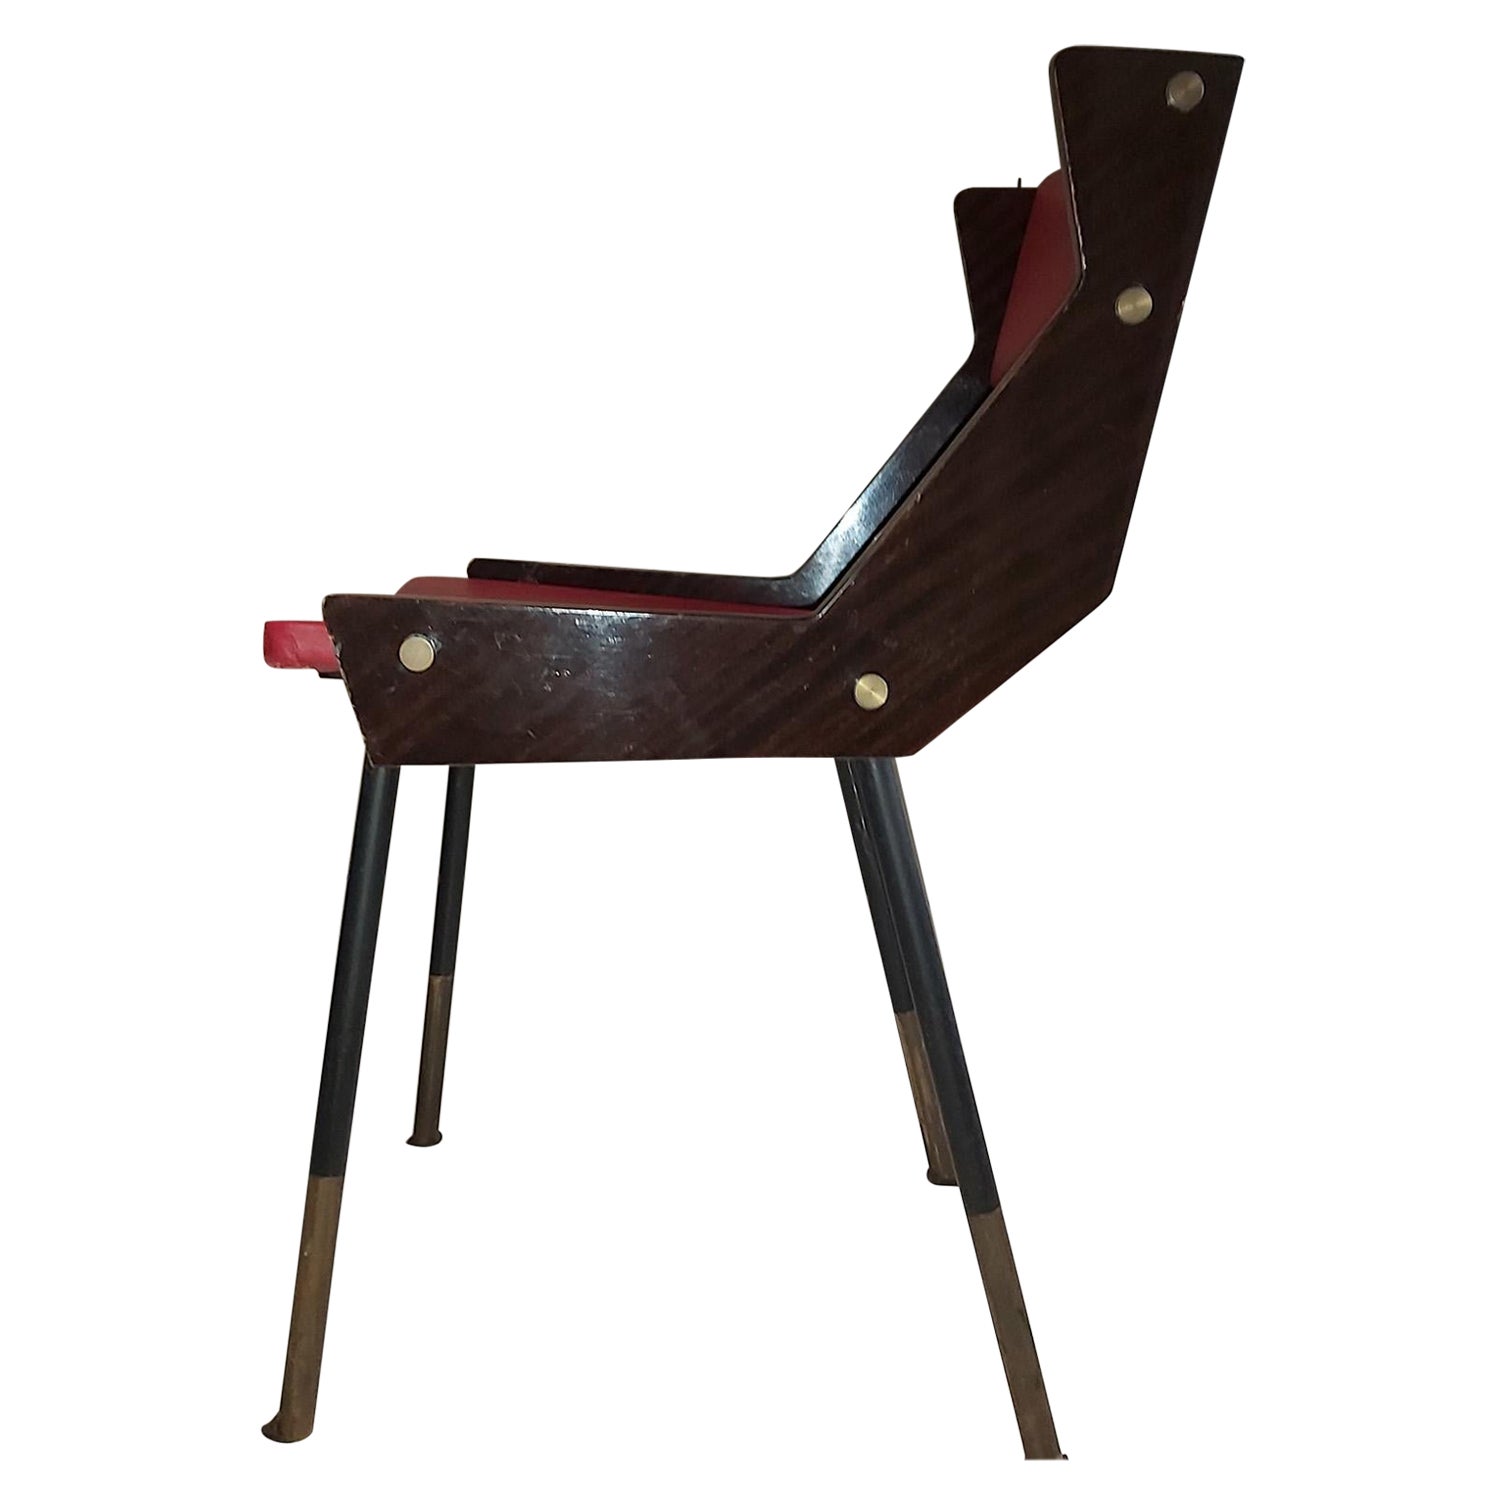 Carlo De Carli Mid-Century Modern Side/Desk Wood and Brass Chair, Italy, 1950s For Sale